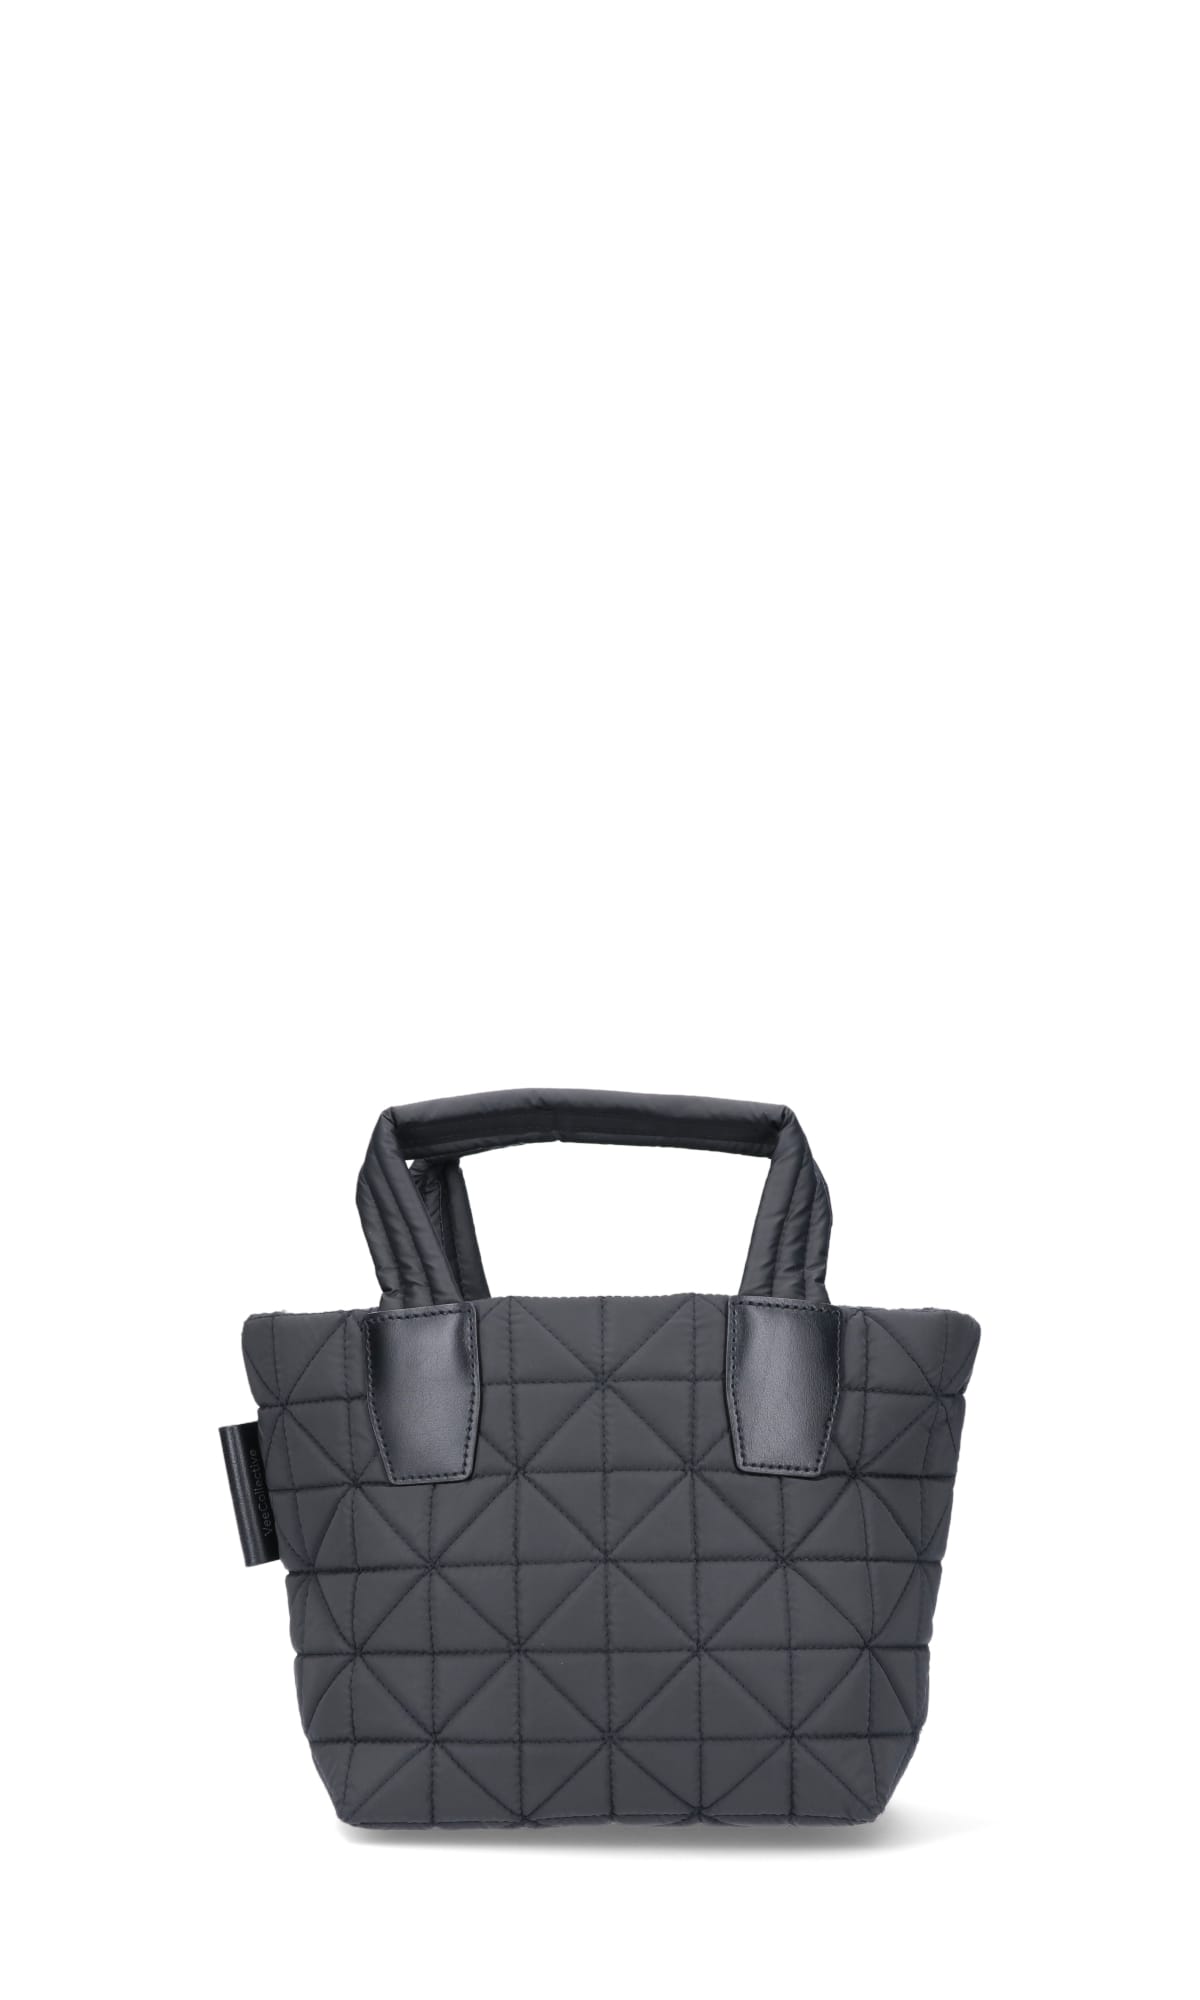 VeeCollective Tote